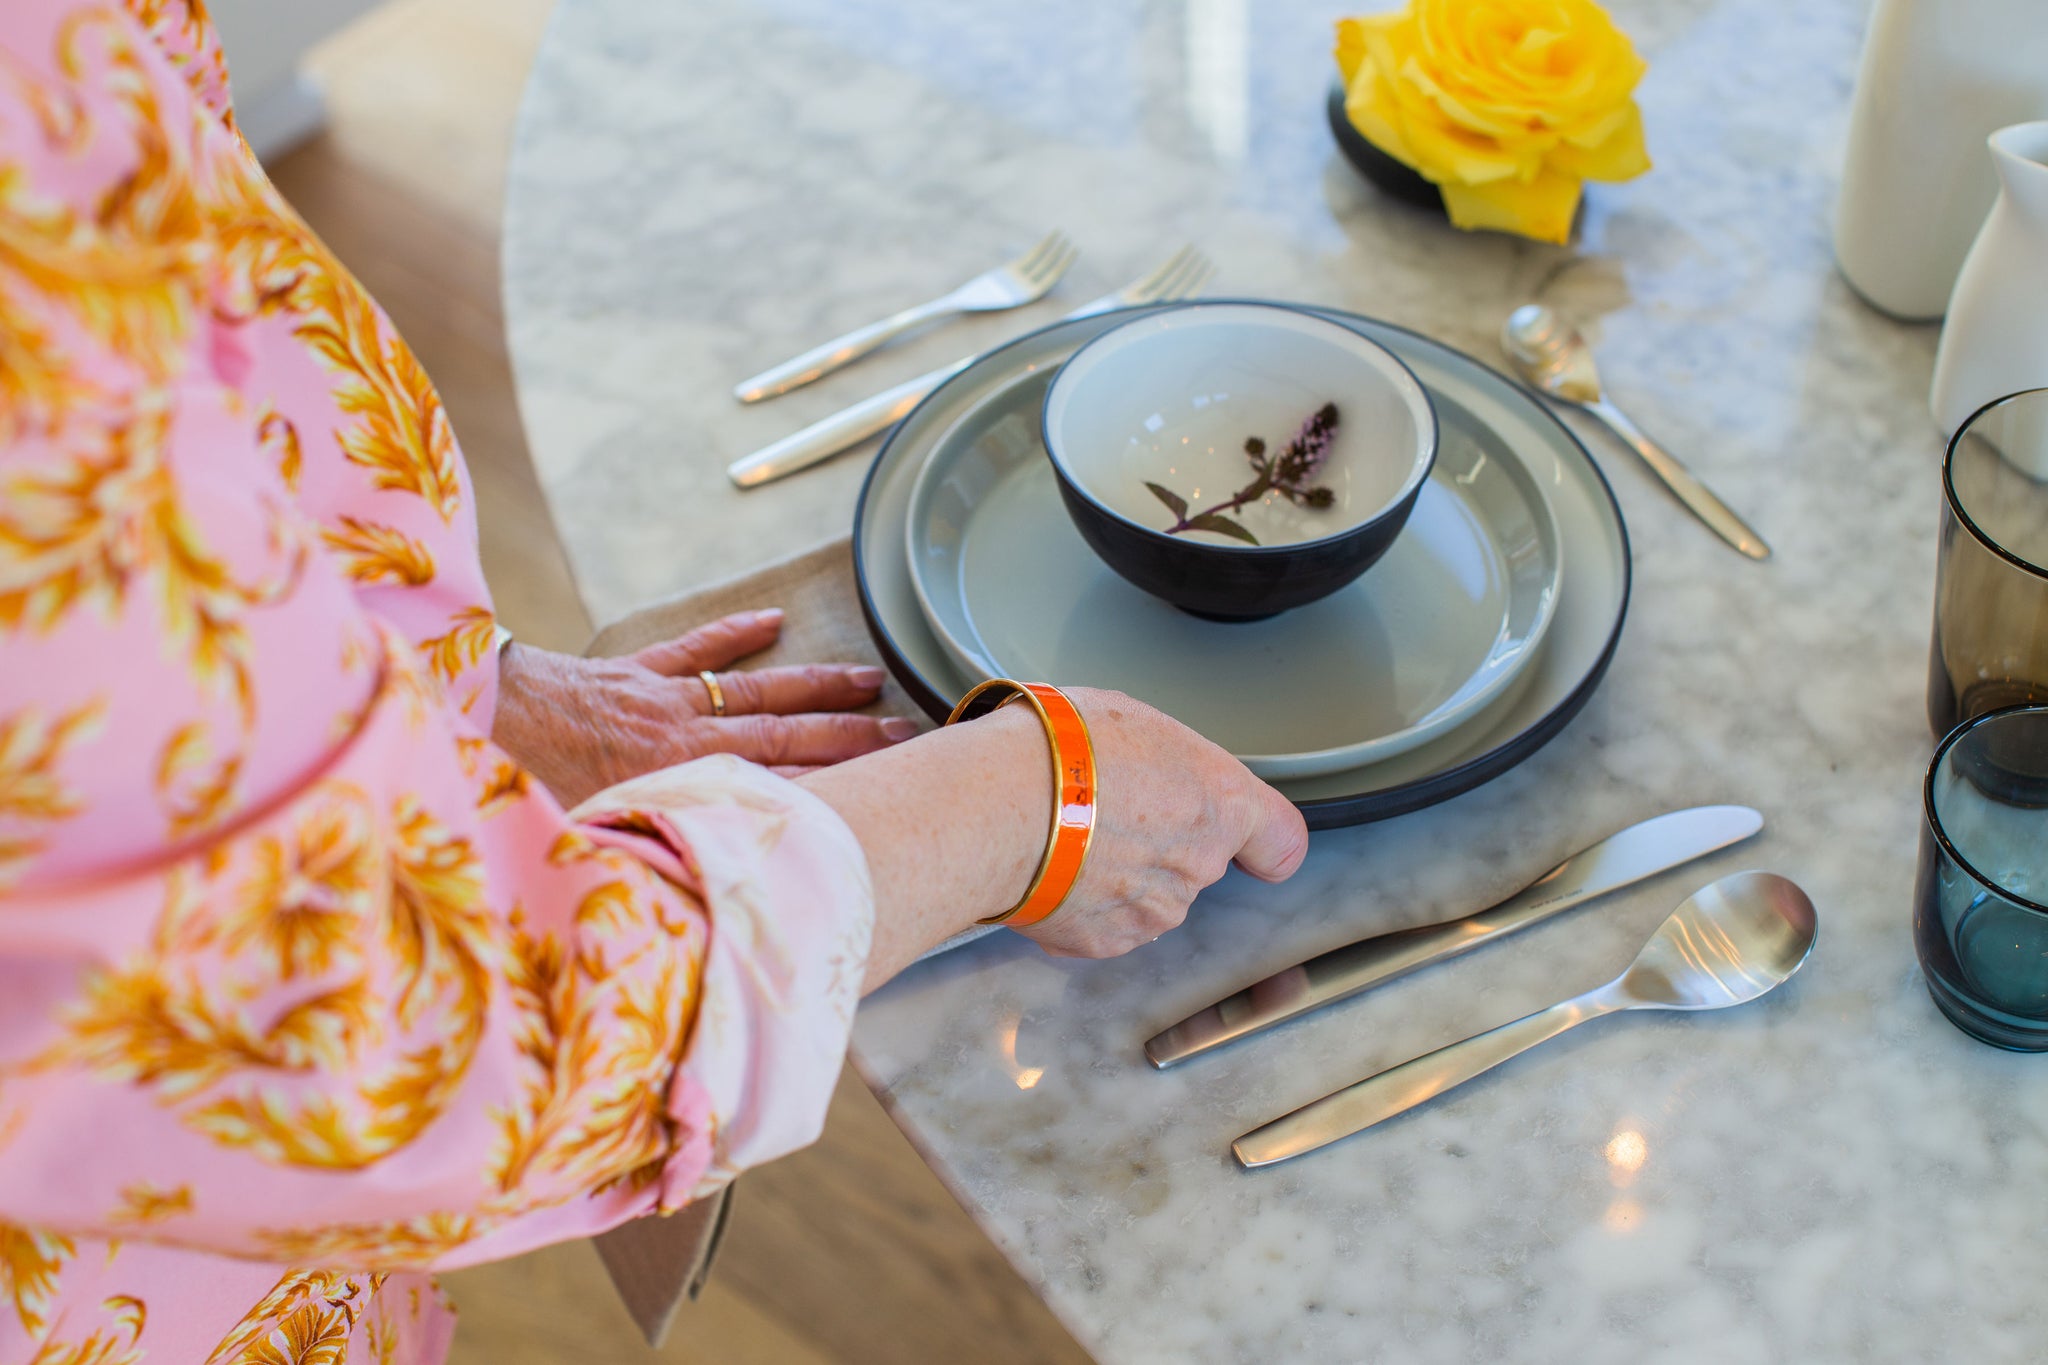 Arminé placing a table napkin beneath the plates for a modern table setting.